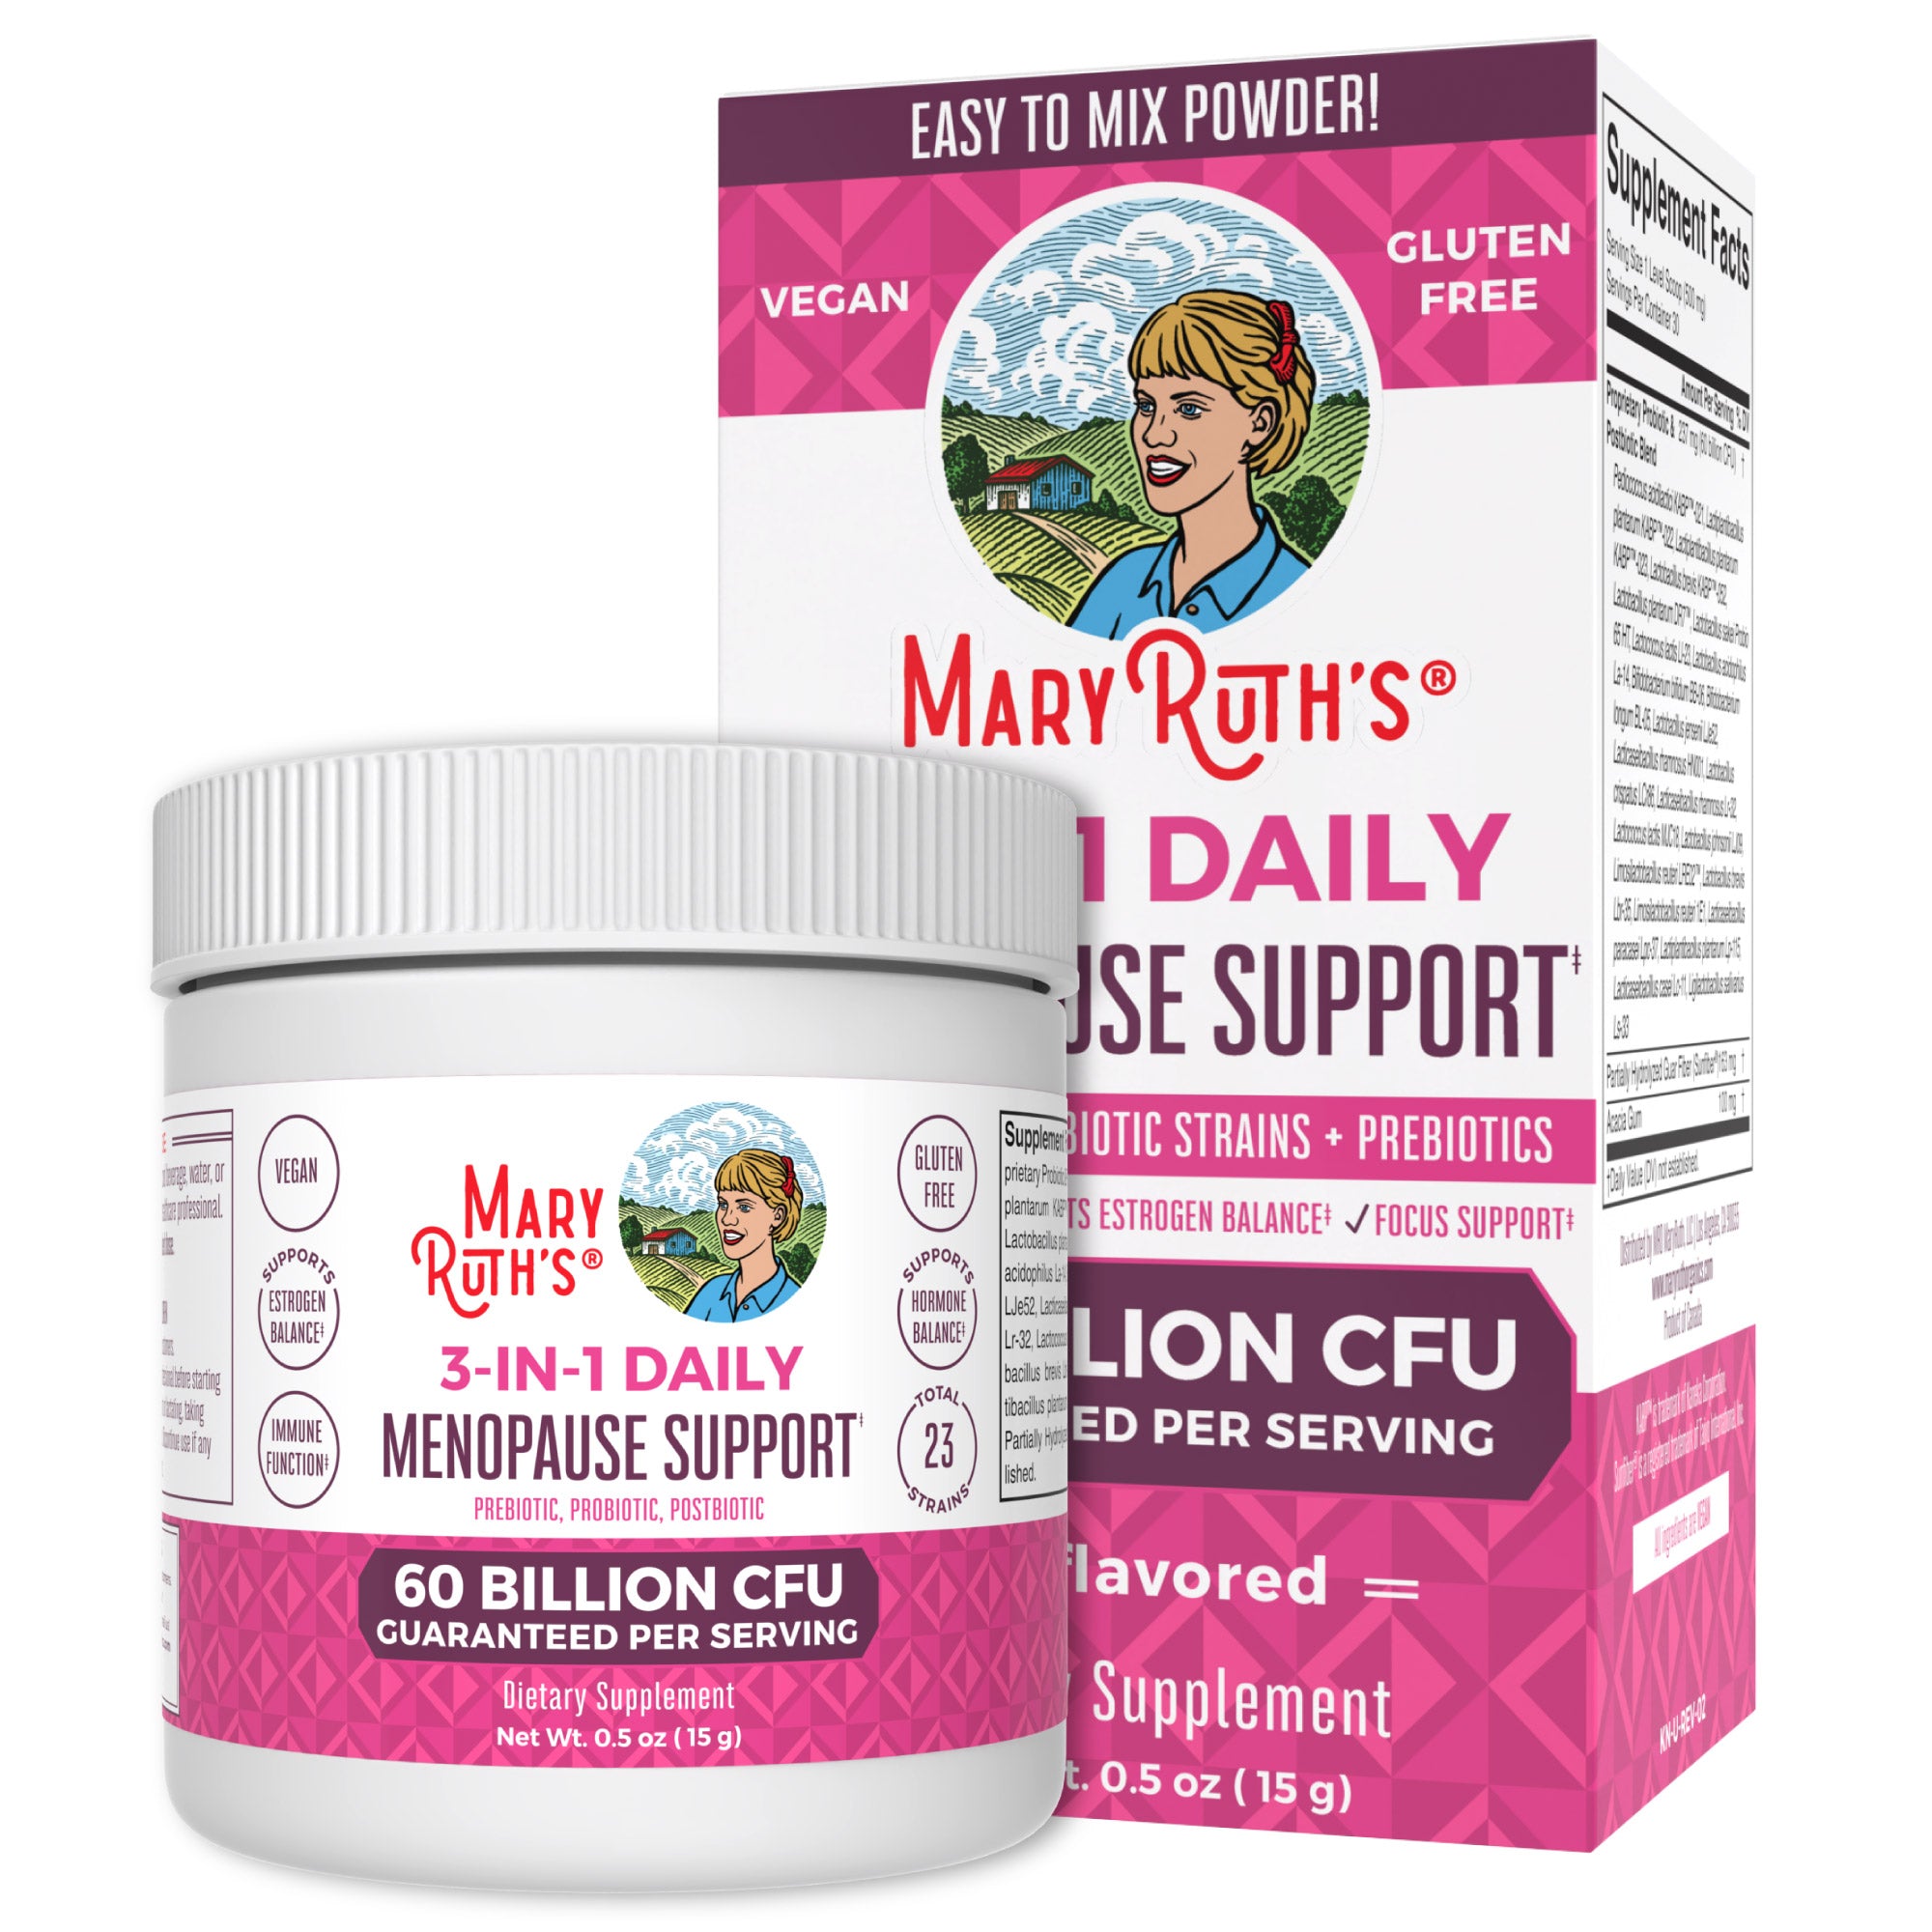 MaryRuth 3-in-1 Menopause Support Powder Vitamin Supplement Unflavored  Product Image Bottle + Box